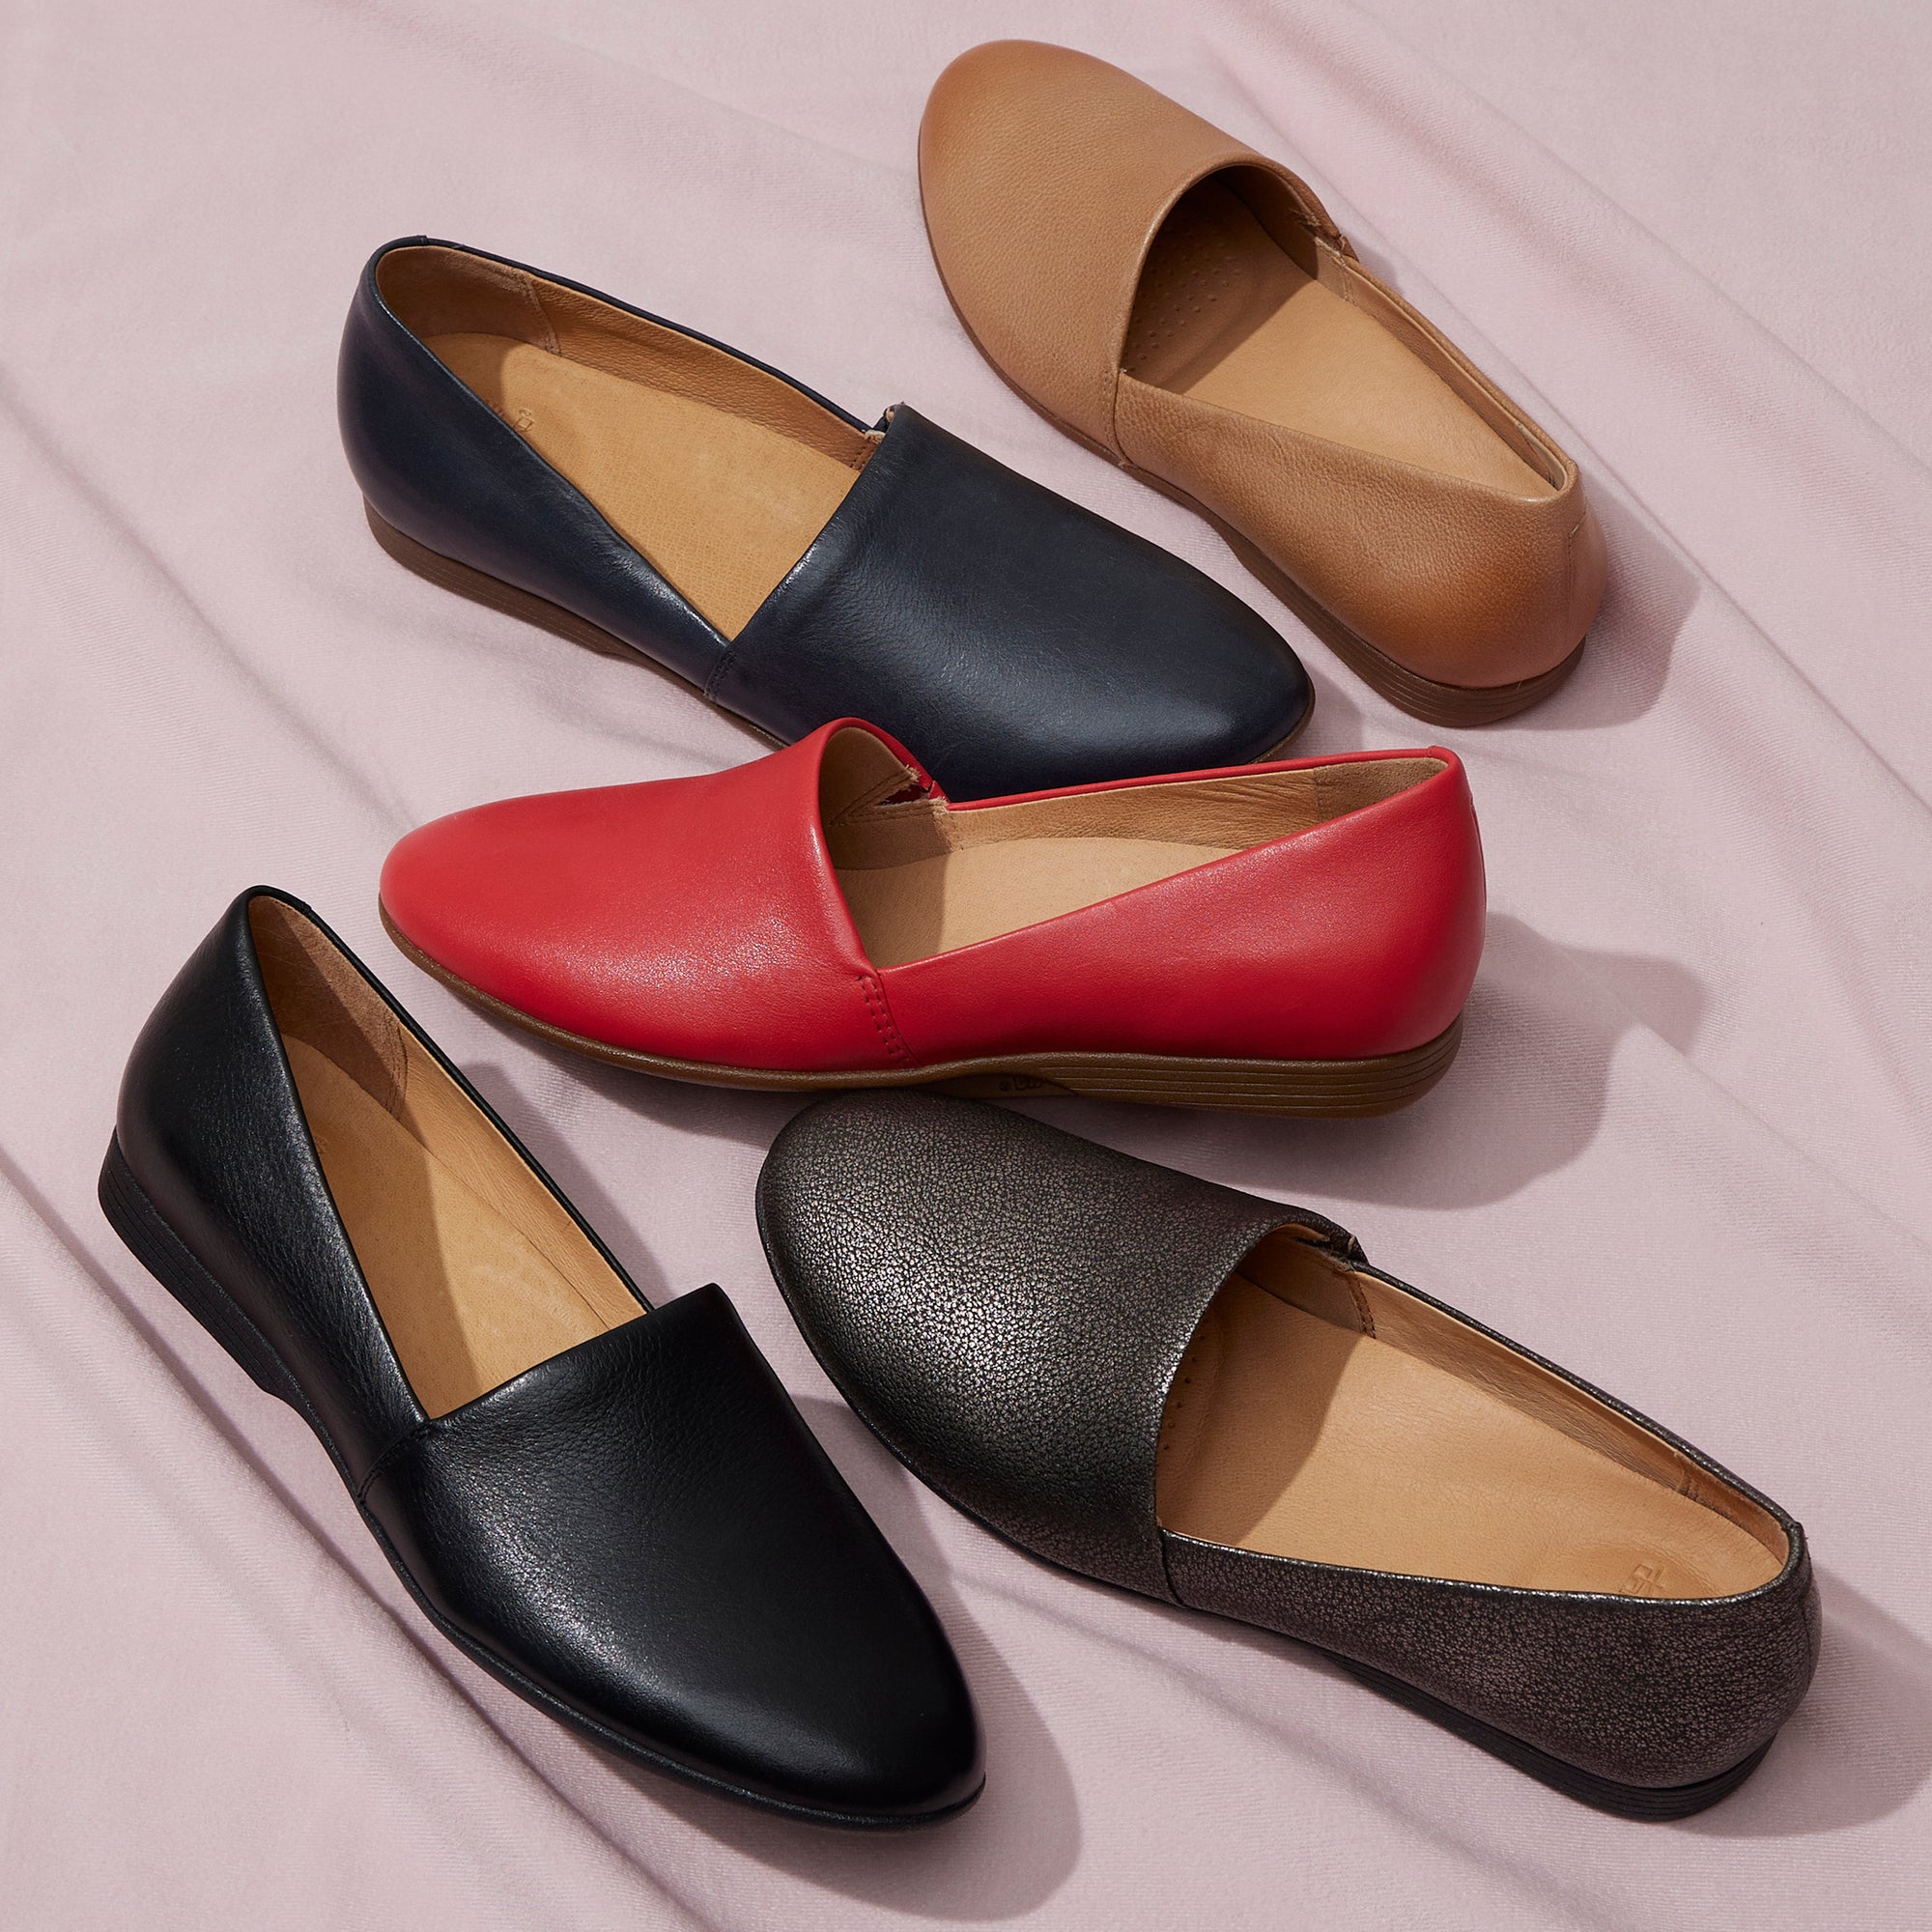 Different colors of a stylish and supportive flat shoe.